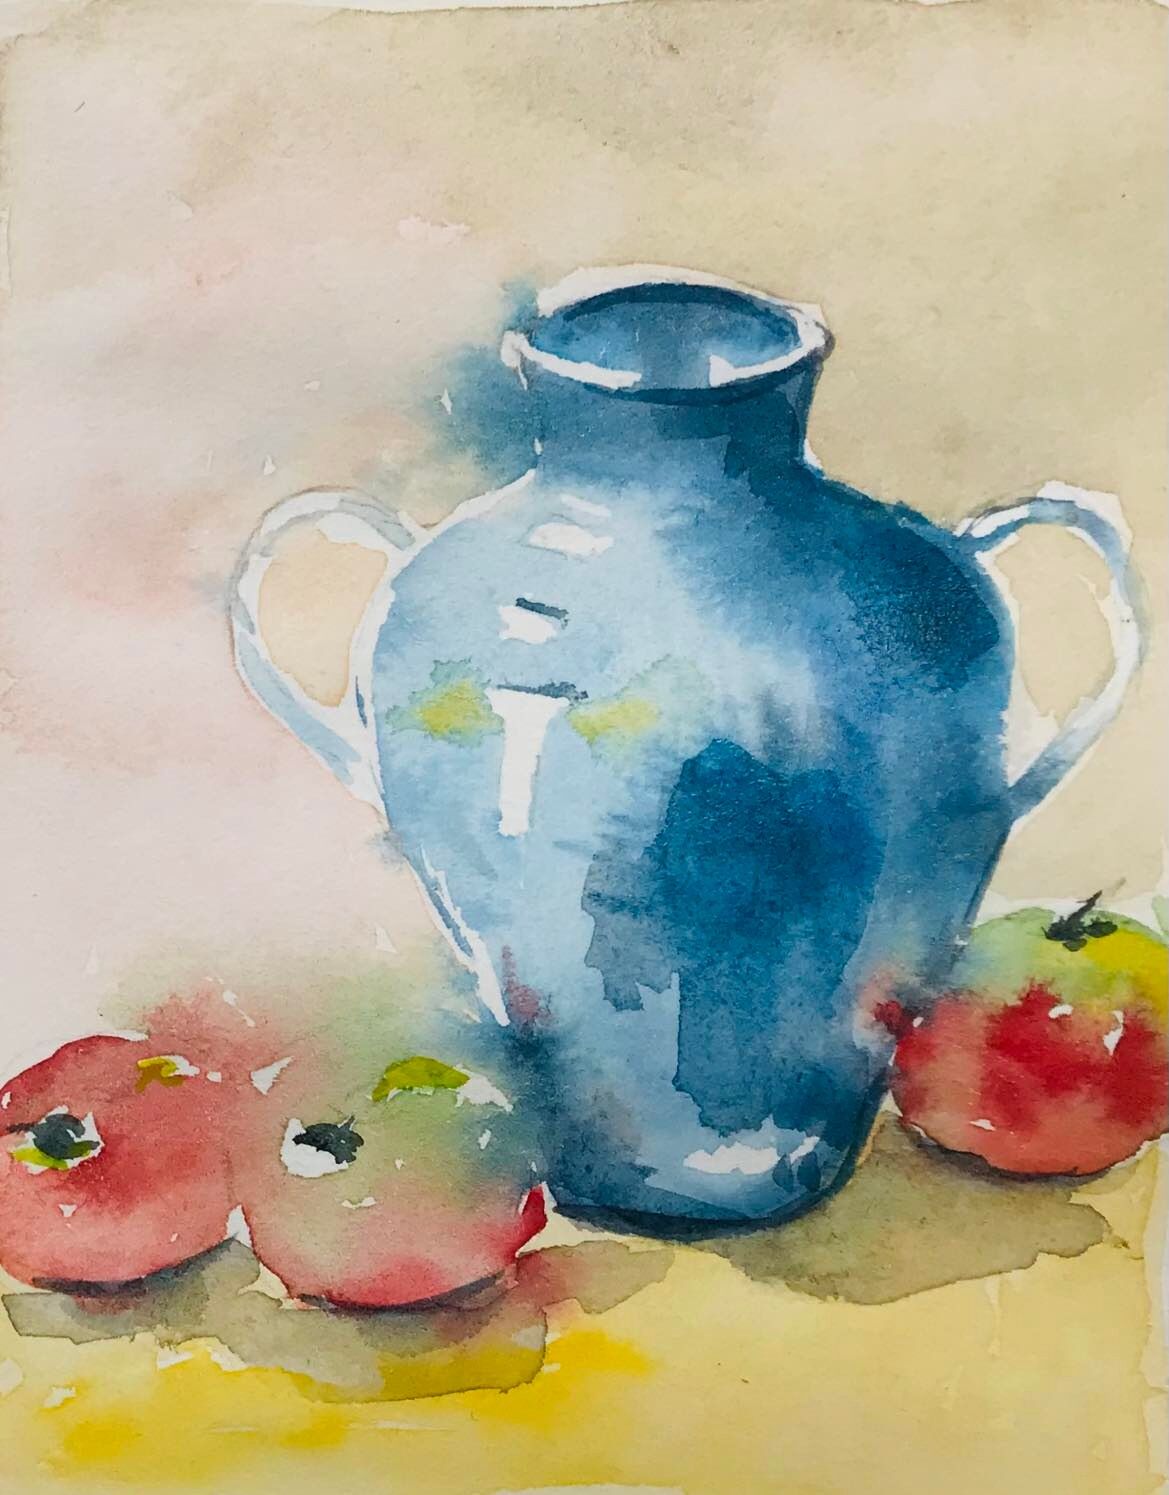 Blue jug with red apples